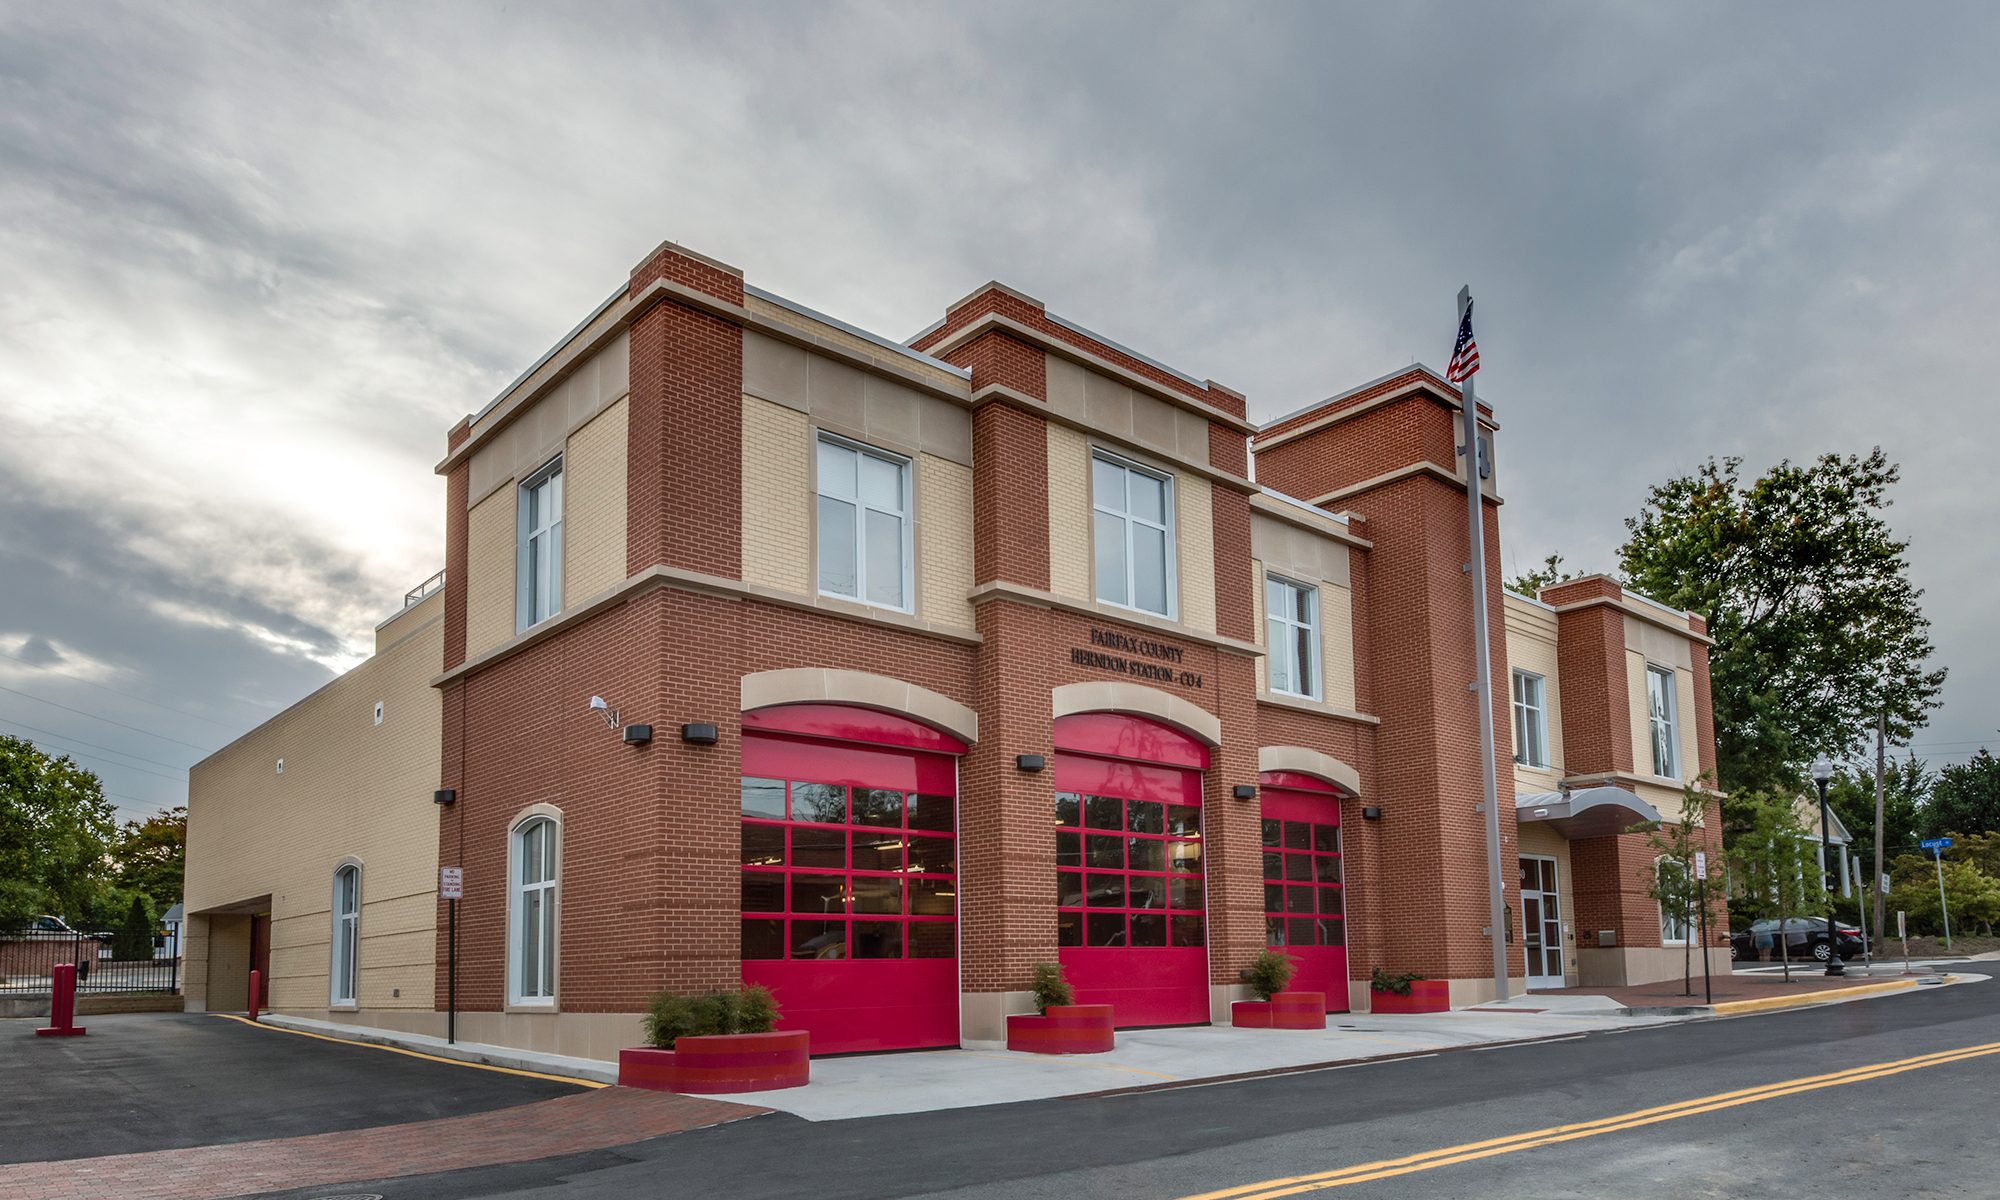 Exterior of Herndon Fire Station